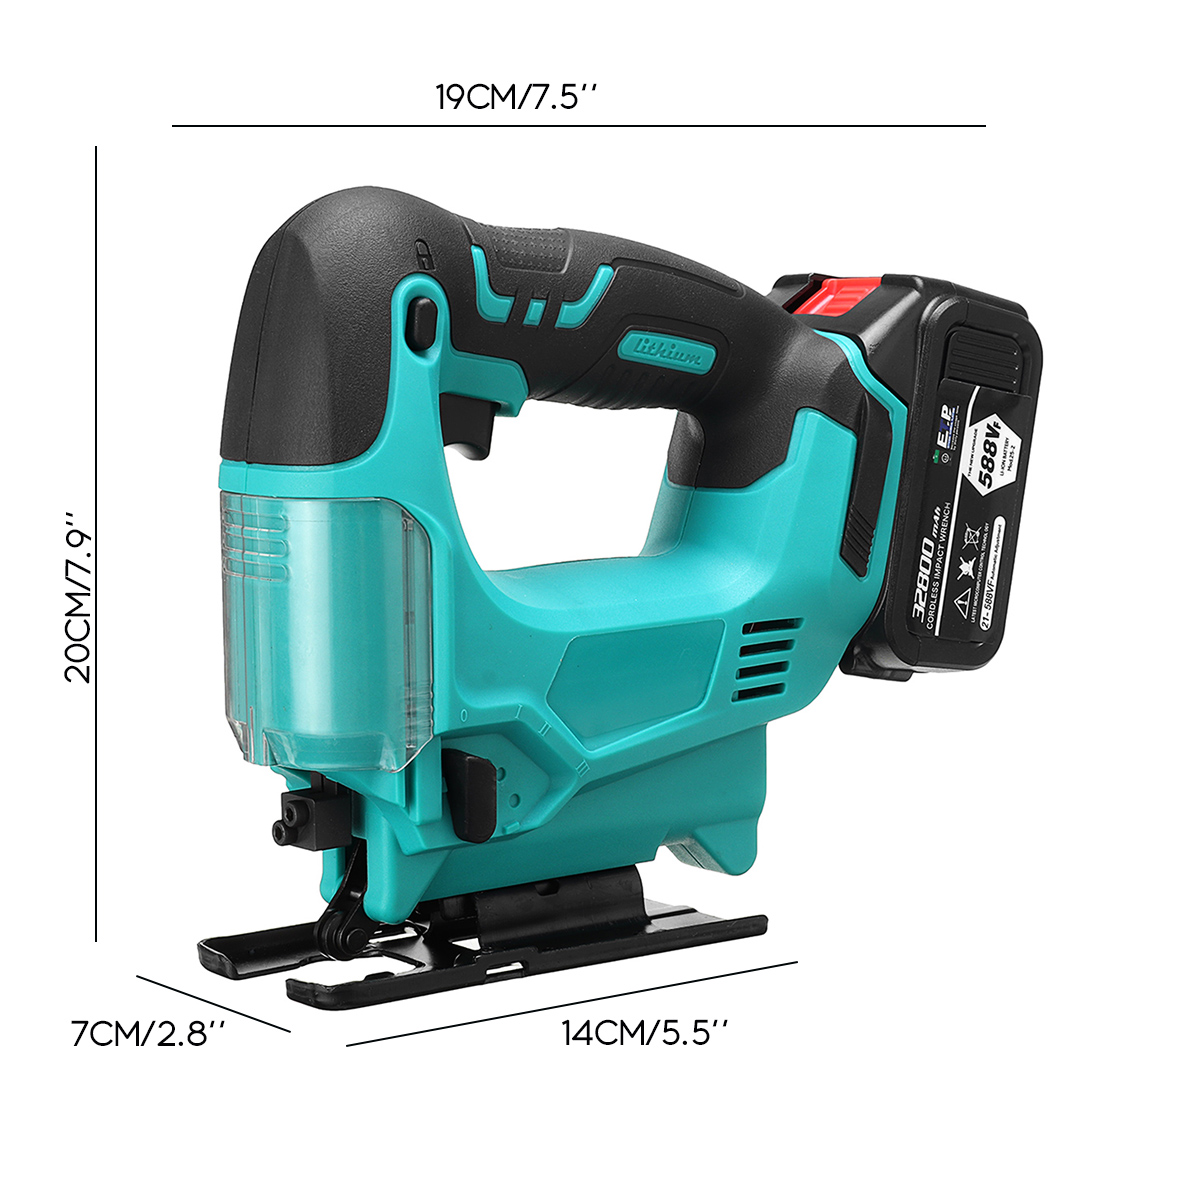 588VF-Electric-Jigsaw-Cordless-Portable-Woodworking-Cutting-Jig-Saw-Power-Tools-W-None12-Battery-1883229-11